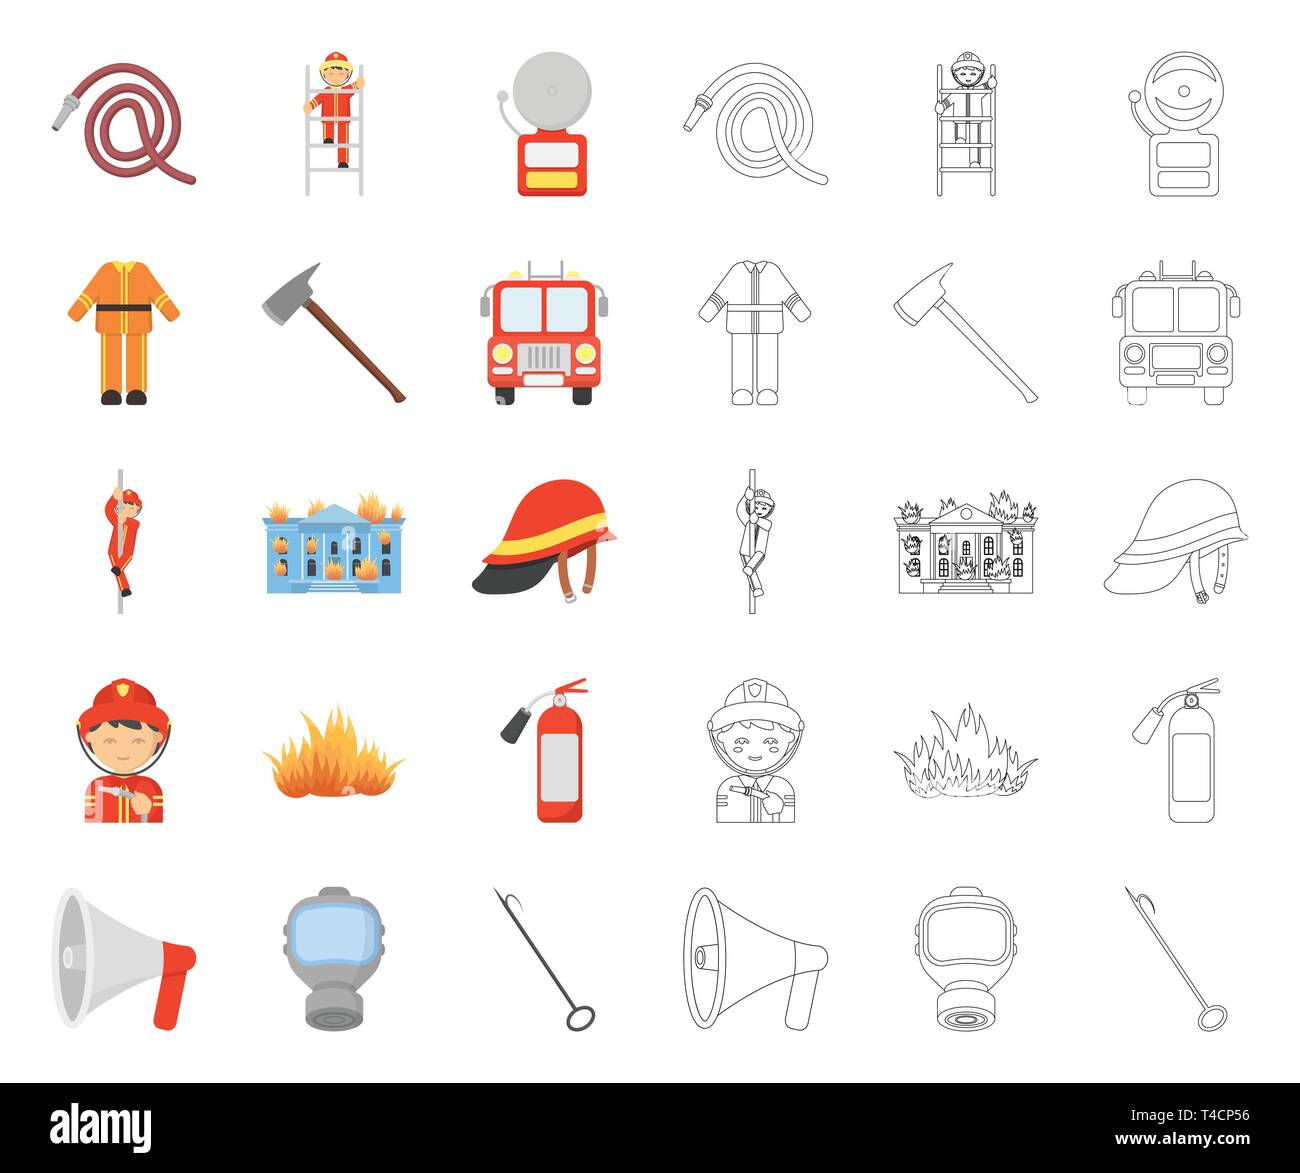 accessories,apparatus,art,attribute,axe,bucket,building,bunker,cartoon,outline,collection,conical,department,design,equipment,extinguishing,extingushier,fire,firefighter,firefighting,flame,gas,gear,helmet,icon,illustration,isolated,logo,mask,organization,pike,pole,pump,ring,separation,service,set,sign,slide,symbol,tools,vector,web Vector Vectors , Stock Vector